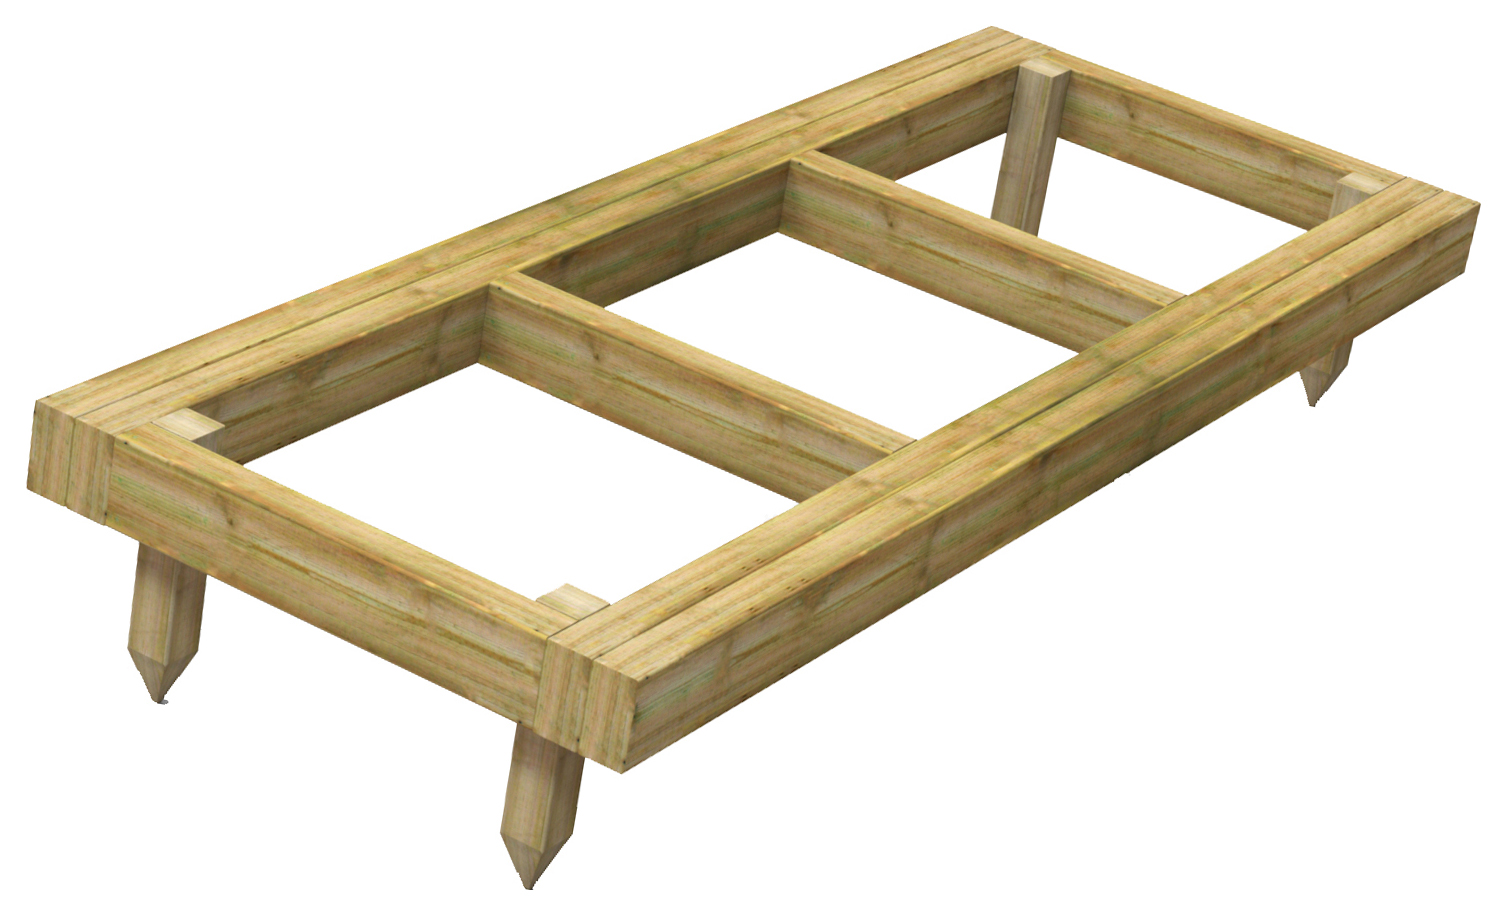 Image of Power Sheds 2 x 6ft Pressure Treated Garden Building Base Kit